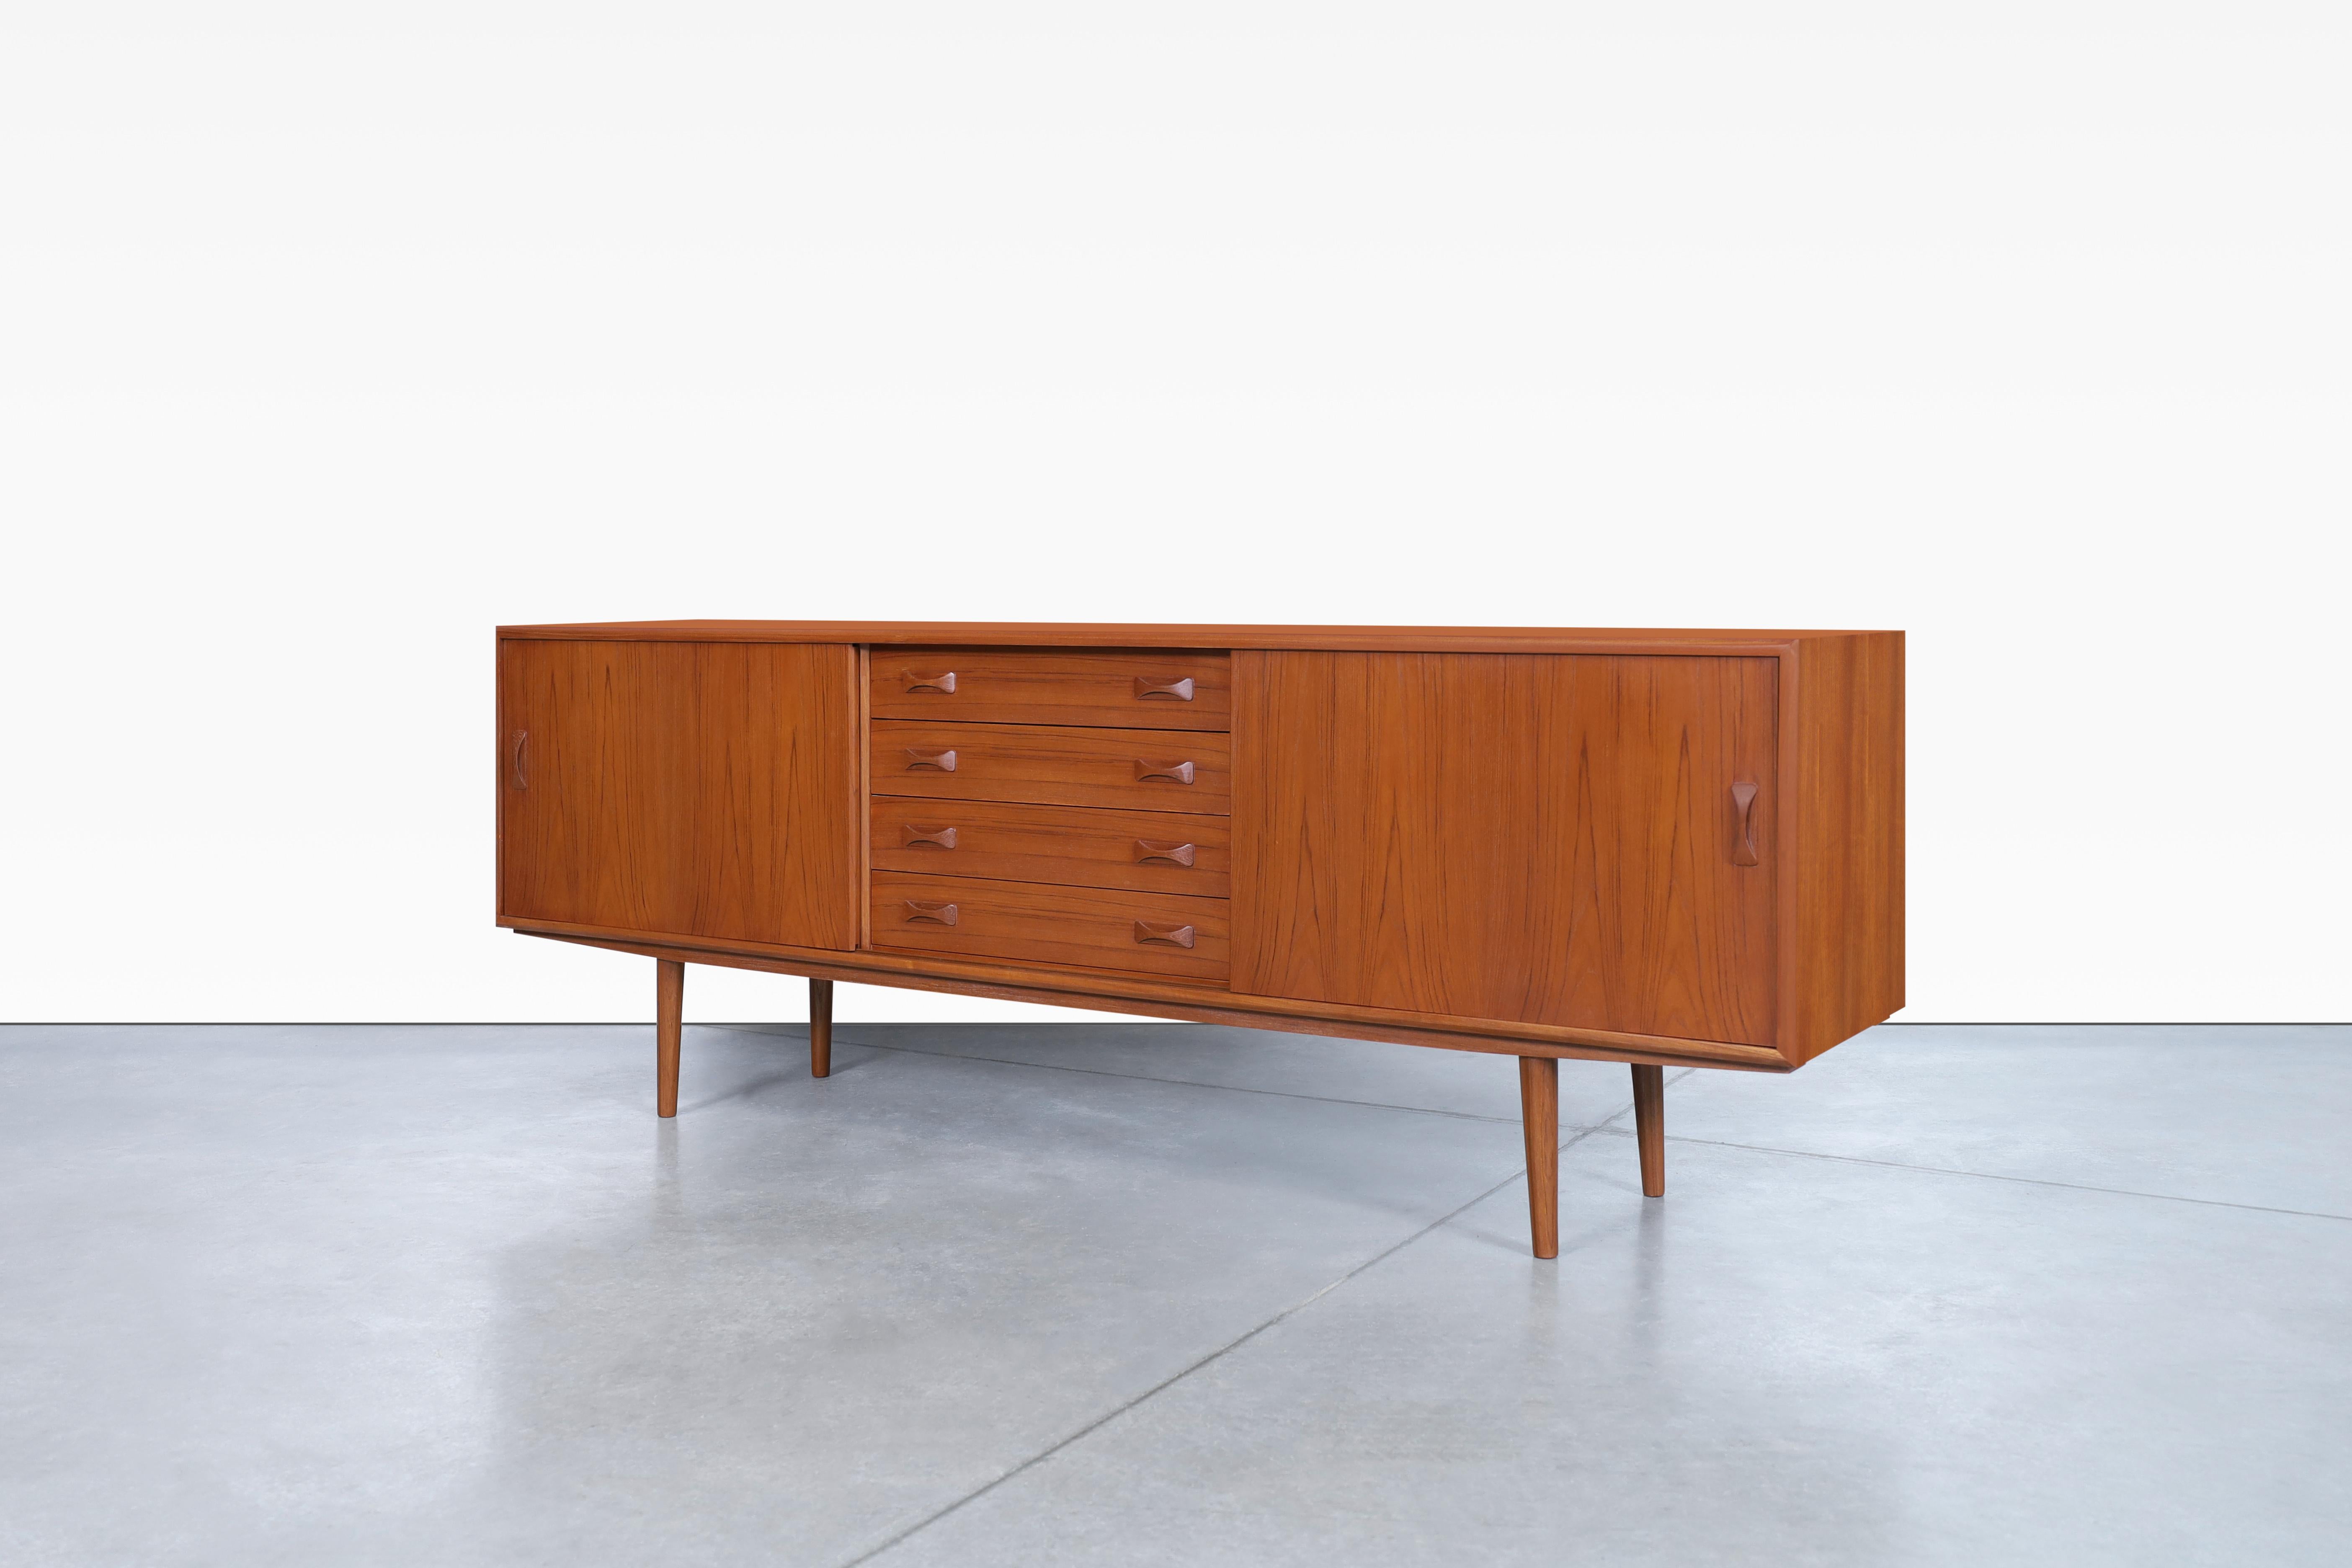 Wonderful teak credenza designed in Denmark for Clausen and Son, circa 1960s. This credenza has an elegant and functional design where the grains of teak wood stand out, which offers a beautiful contrast of colors and figures throughout the entire